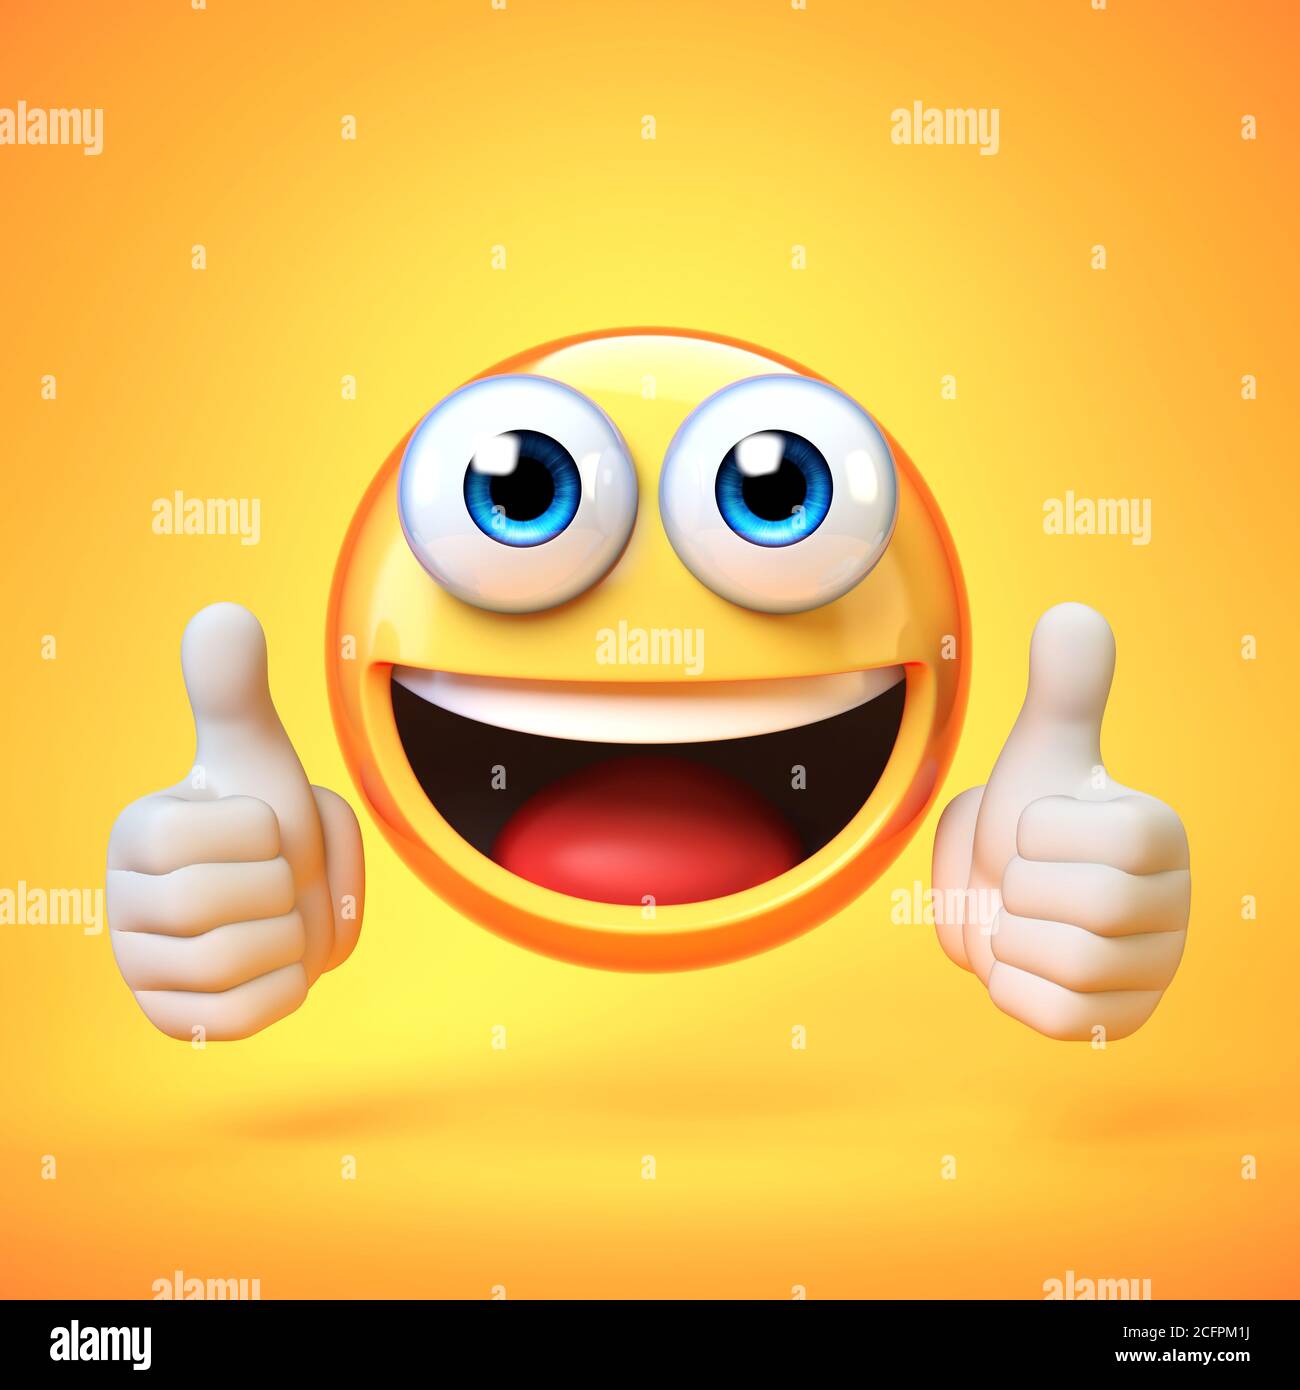 Thumbs Up Emoji Isolated On Yellow Background Emoticon Giving Likes 3d Rendering Stock Photo Alamy